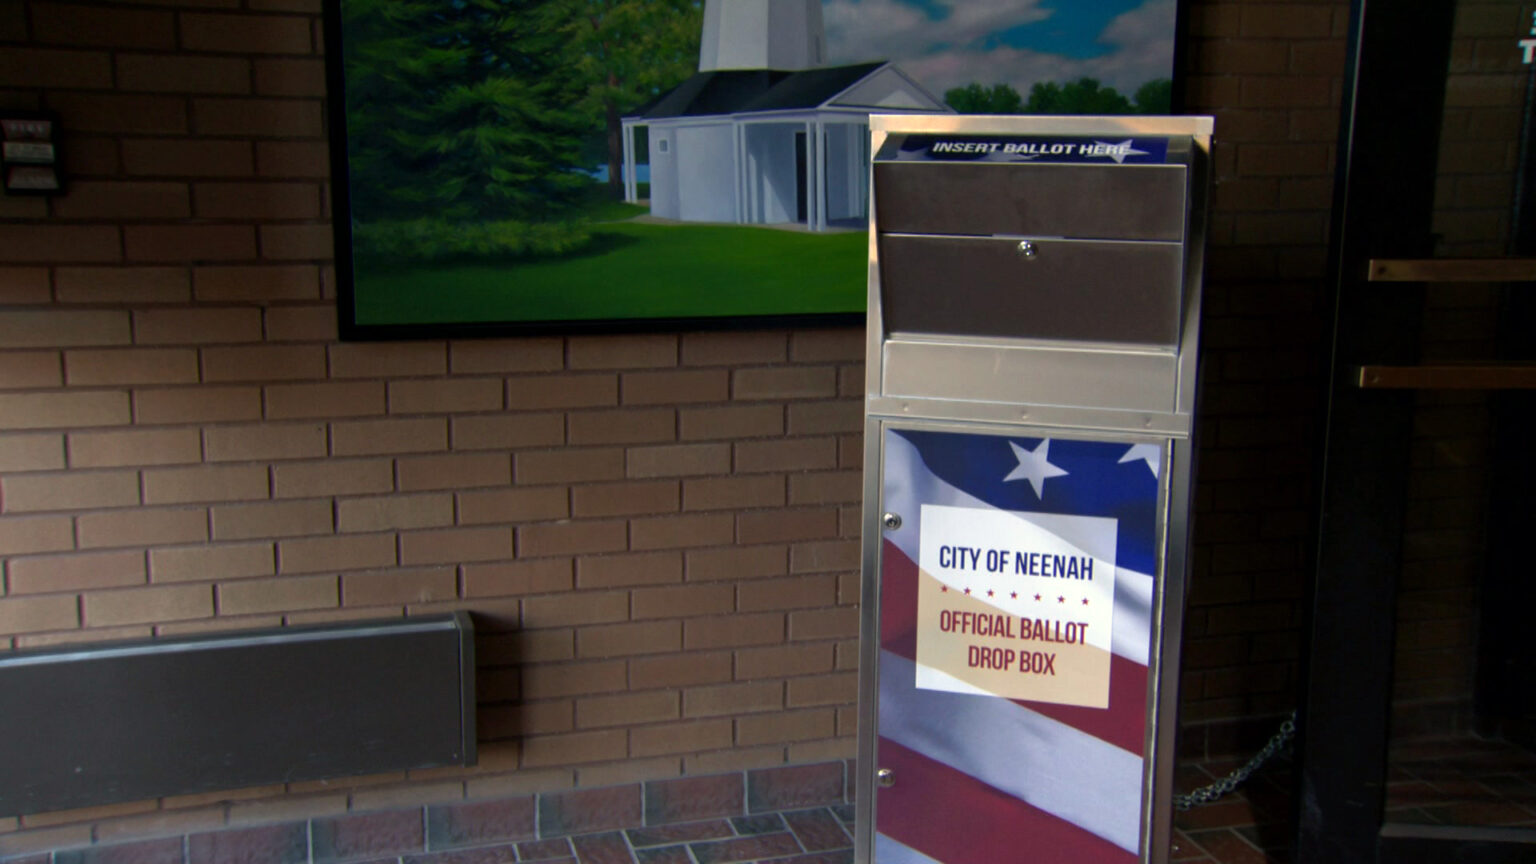 A metal box with a delivery slot at its top and a graphic of the U.S. flag with a sign reading City of Neenah and Official Ballot Drop Box on its front stands in front of a brick wall with a painting of a building and trees.